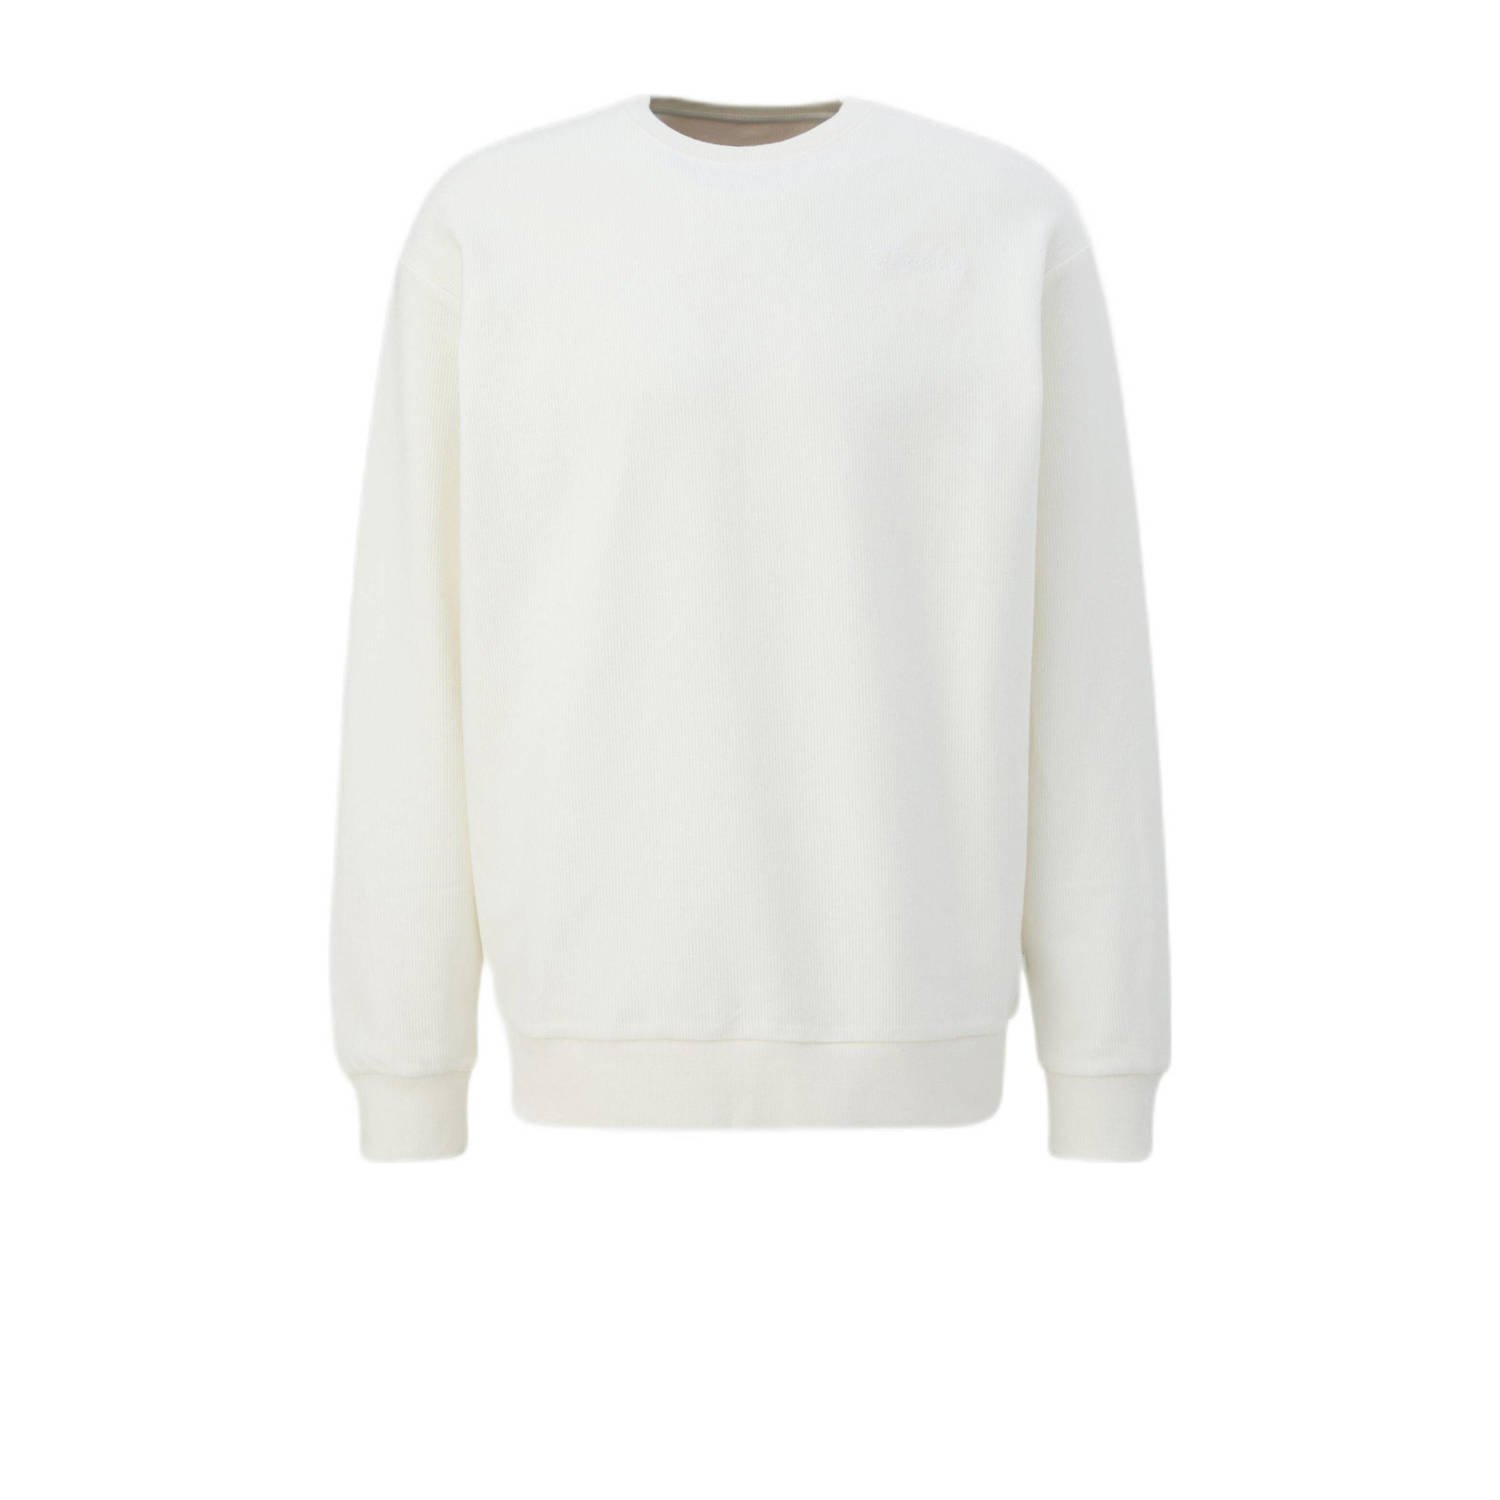 Q S by s.Oliver sweater wit